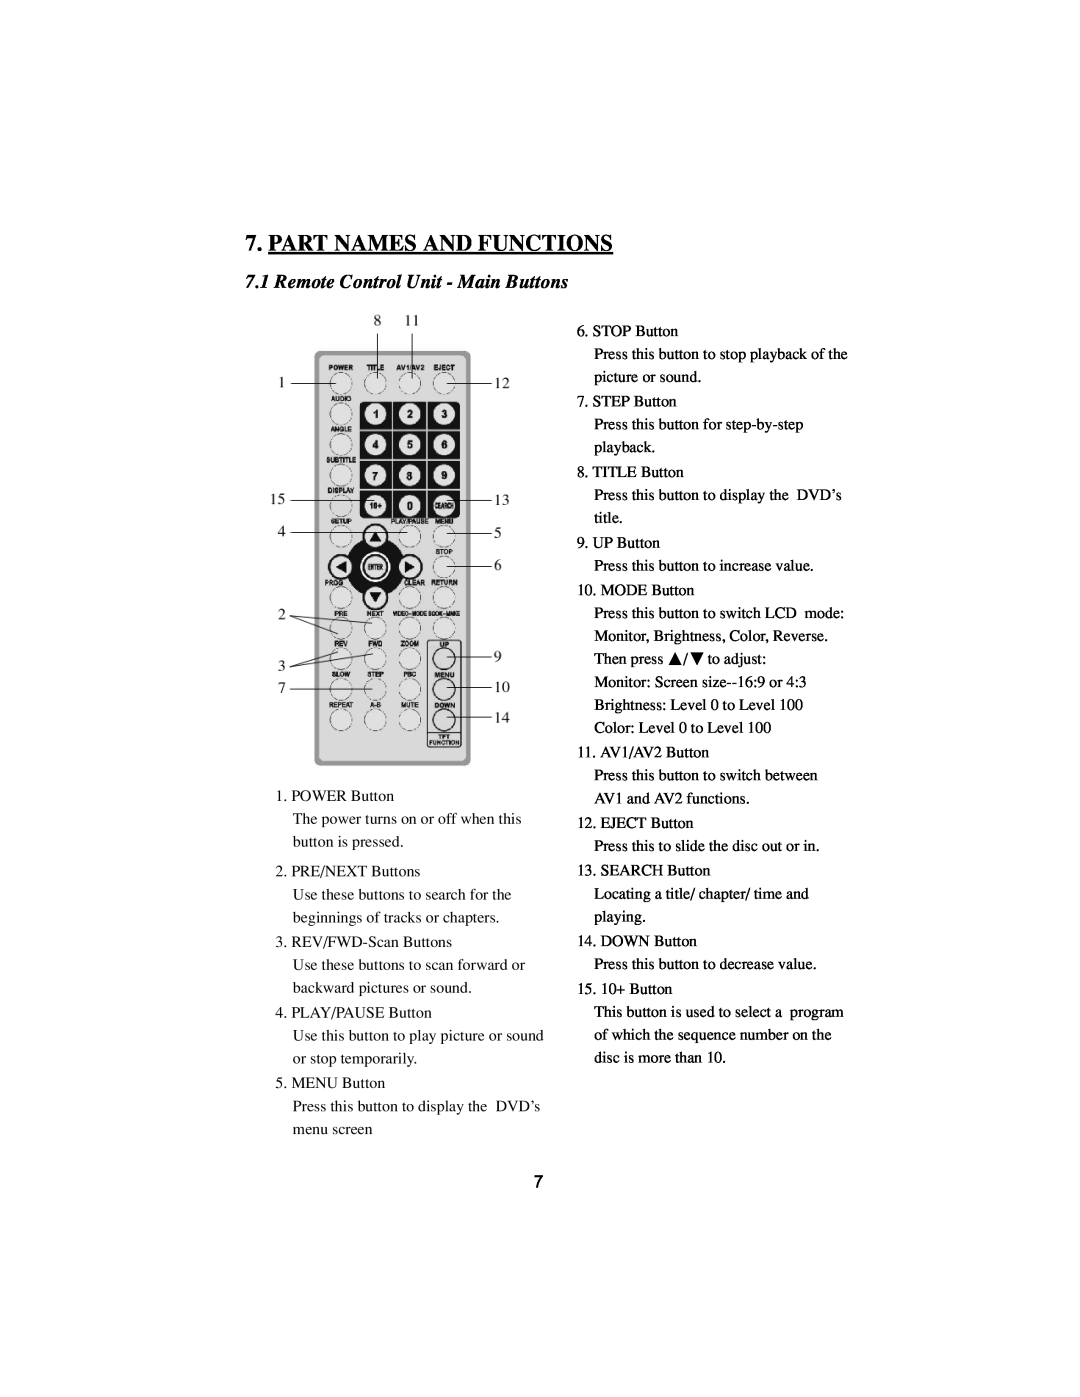 PYLE Audio DVD manual Part Names And Functions, Remote Control Unit - Main Buttons 